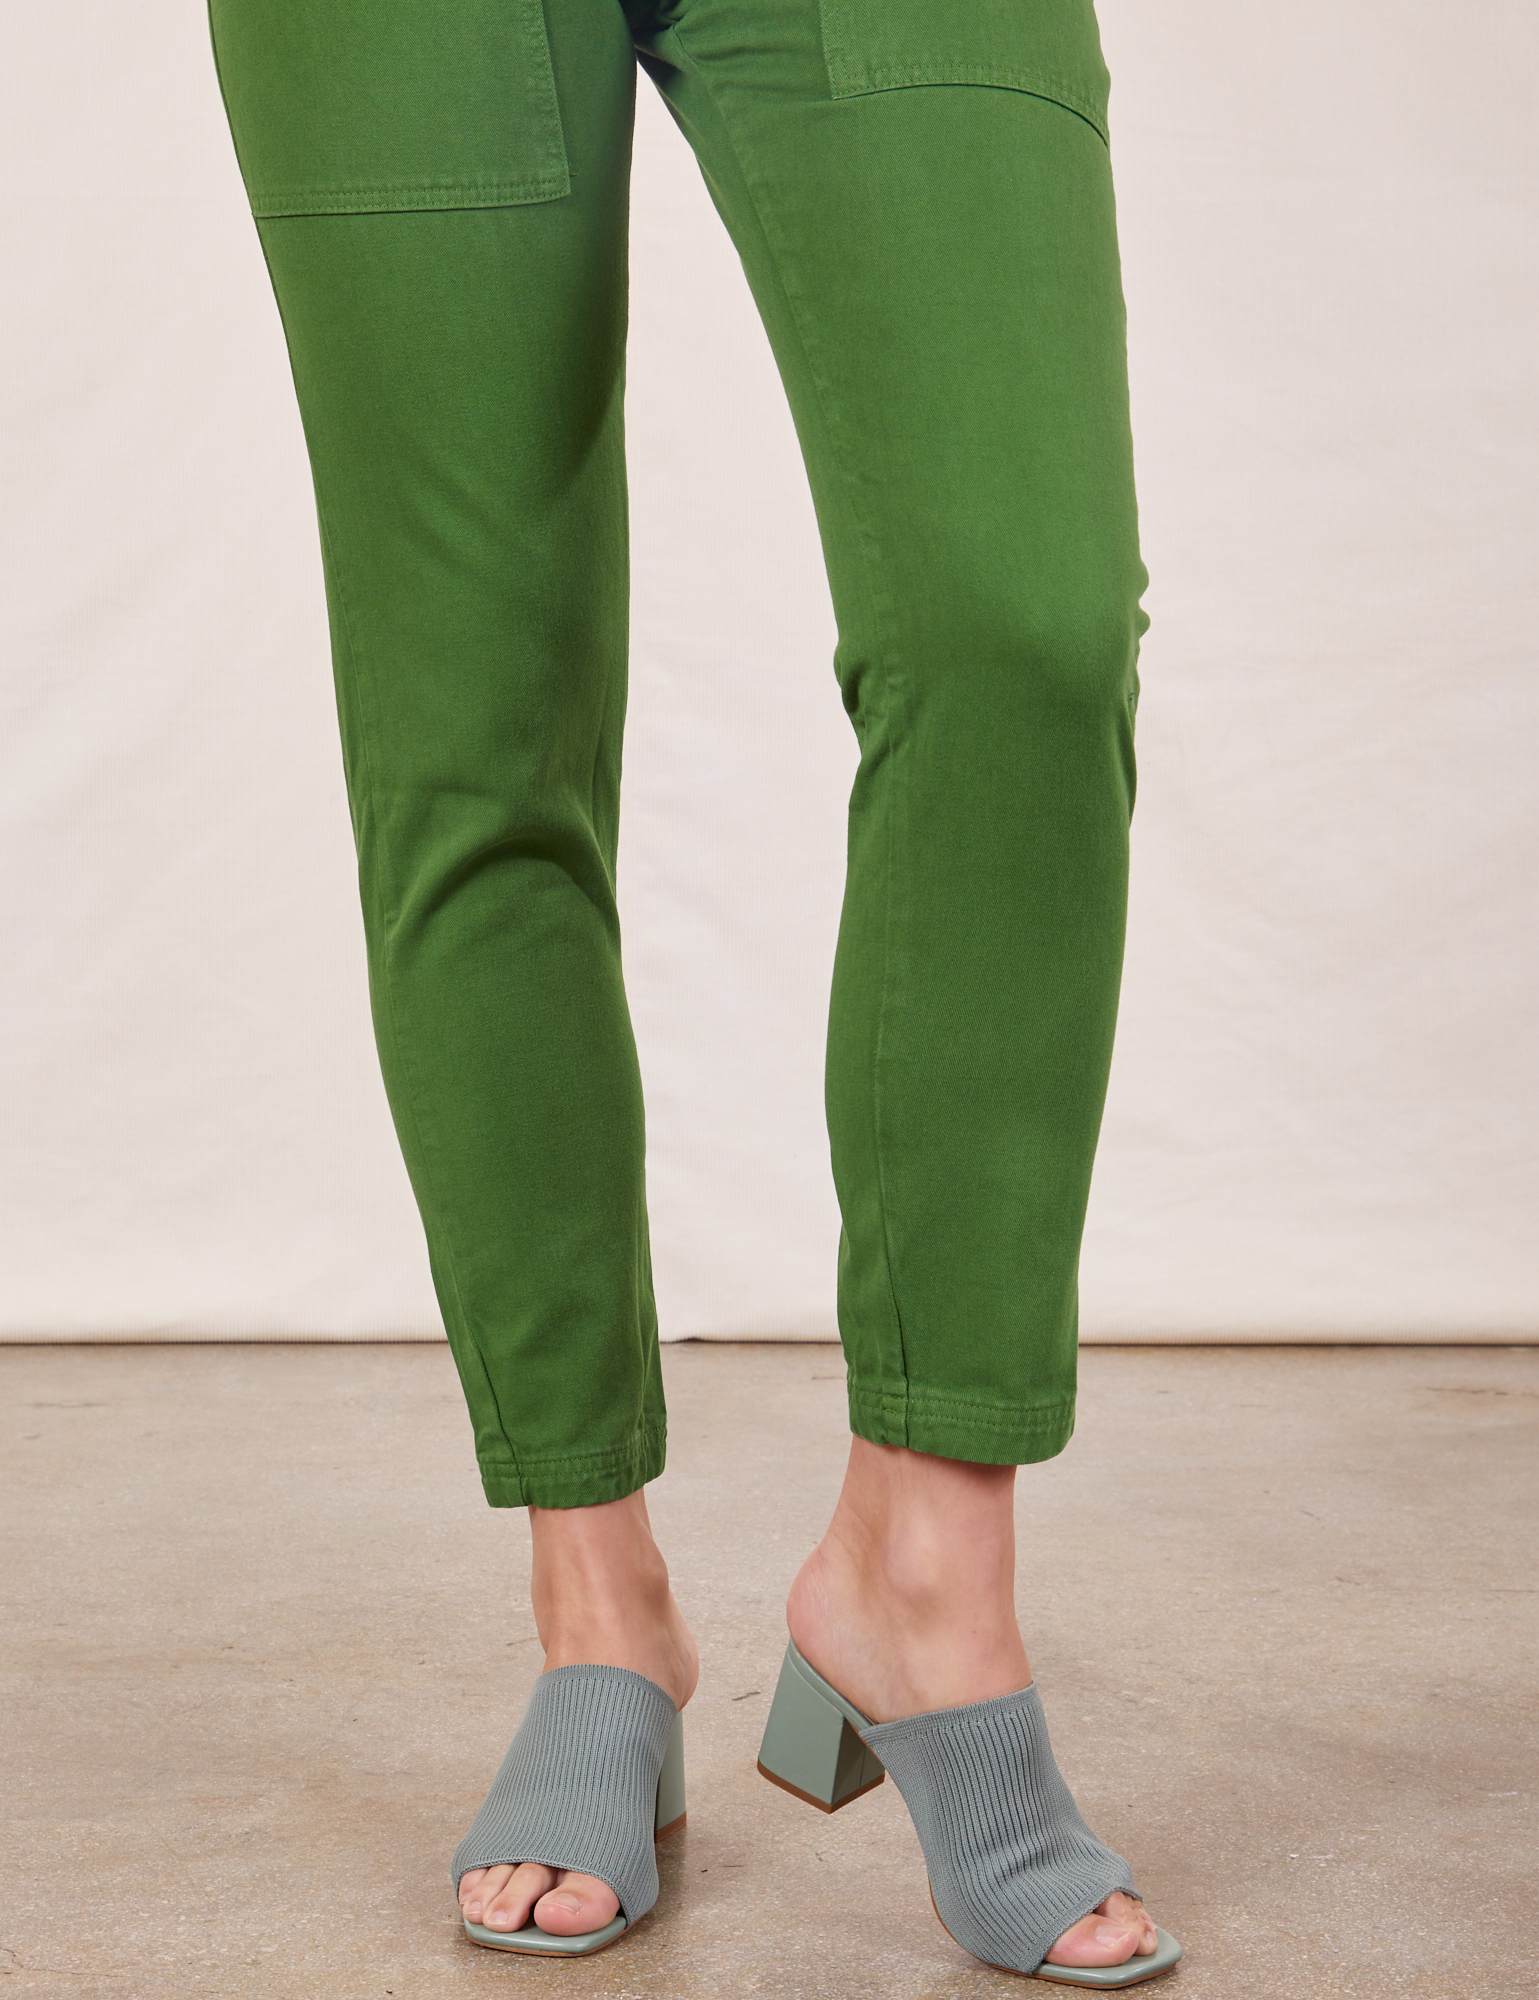 Pencil Pants in Lawn Green pant leg close up on Alex